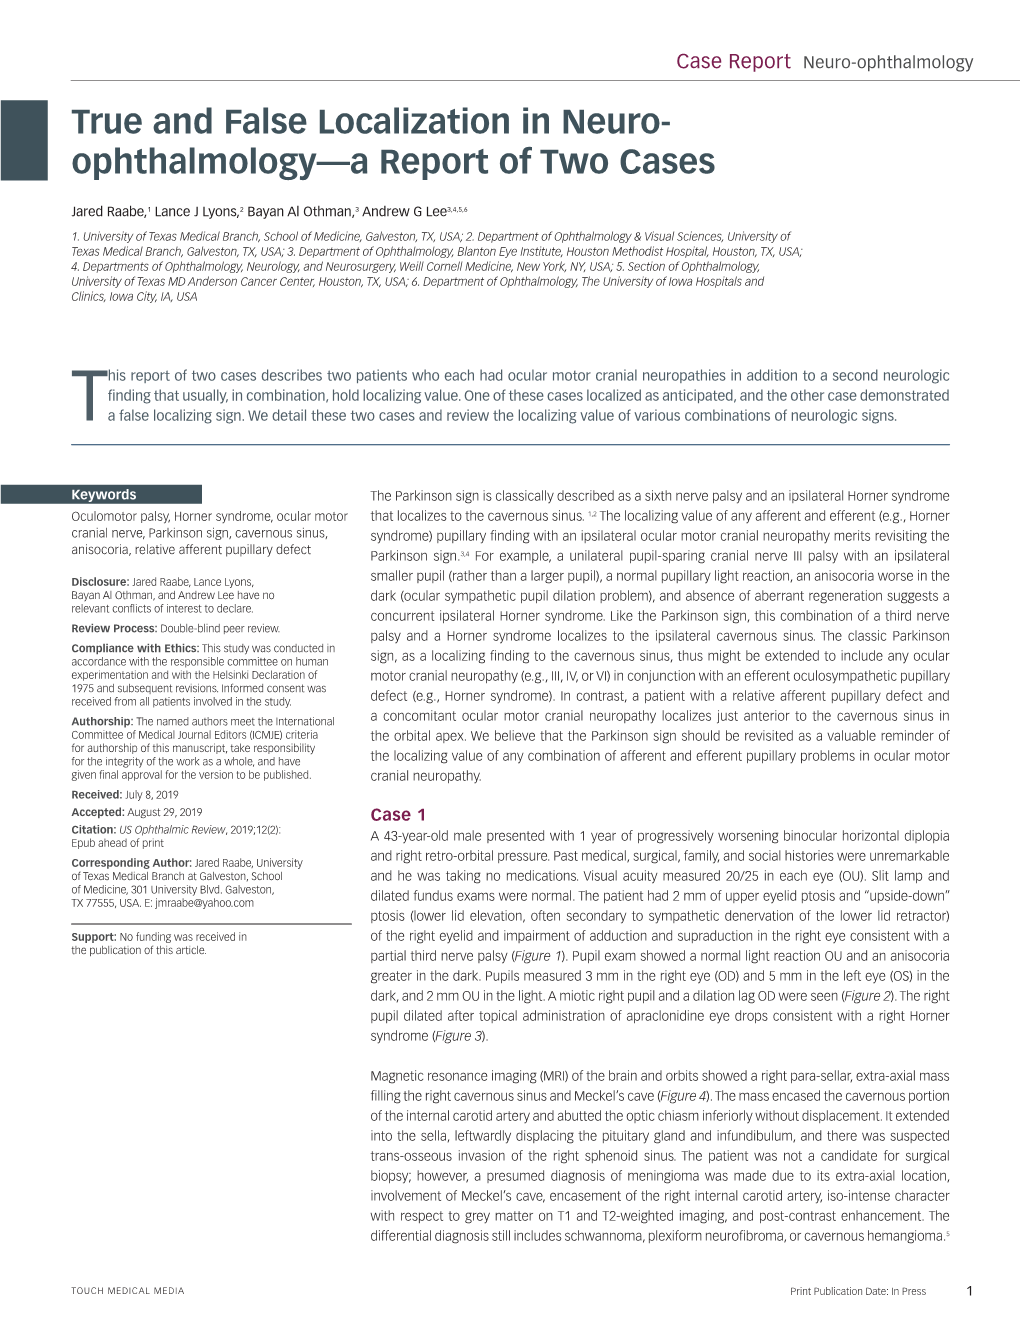 True and False Localization in Neuro- Ophthalmology—A Report of Two Cases